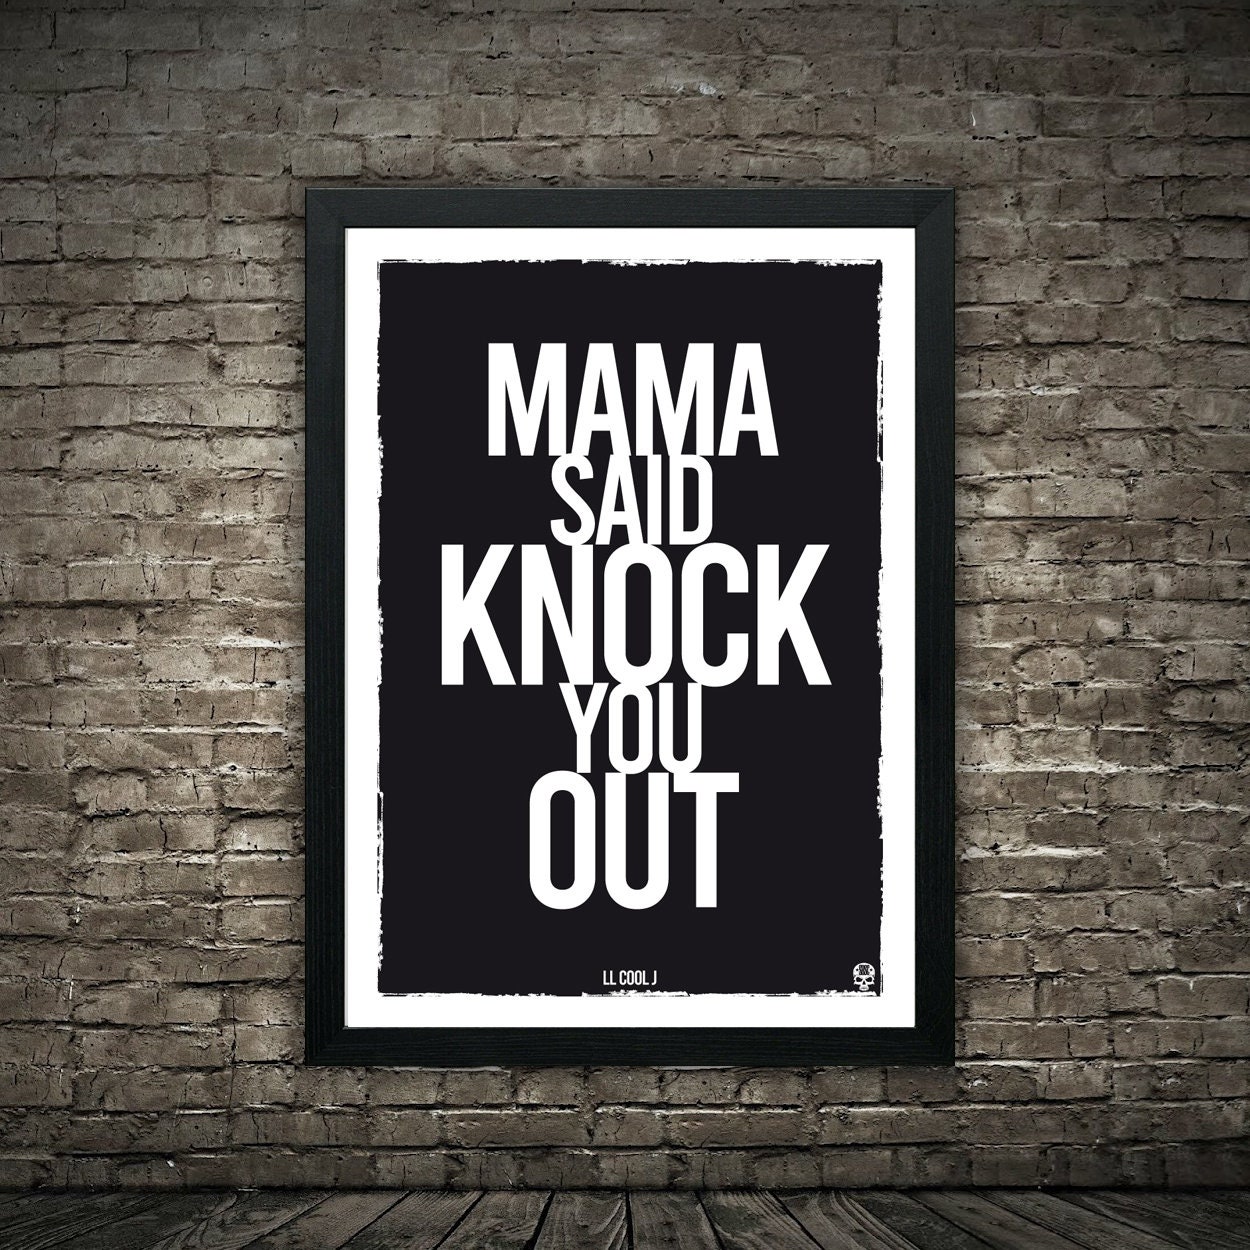 LL Cool J on 'Mama Said Knock You Out' LP, Rock the Bells Site